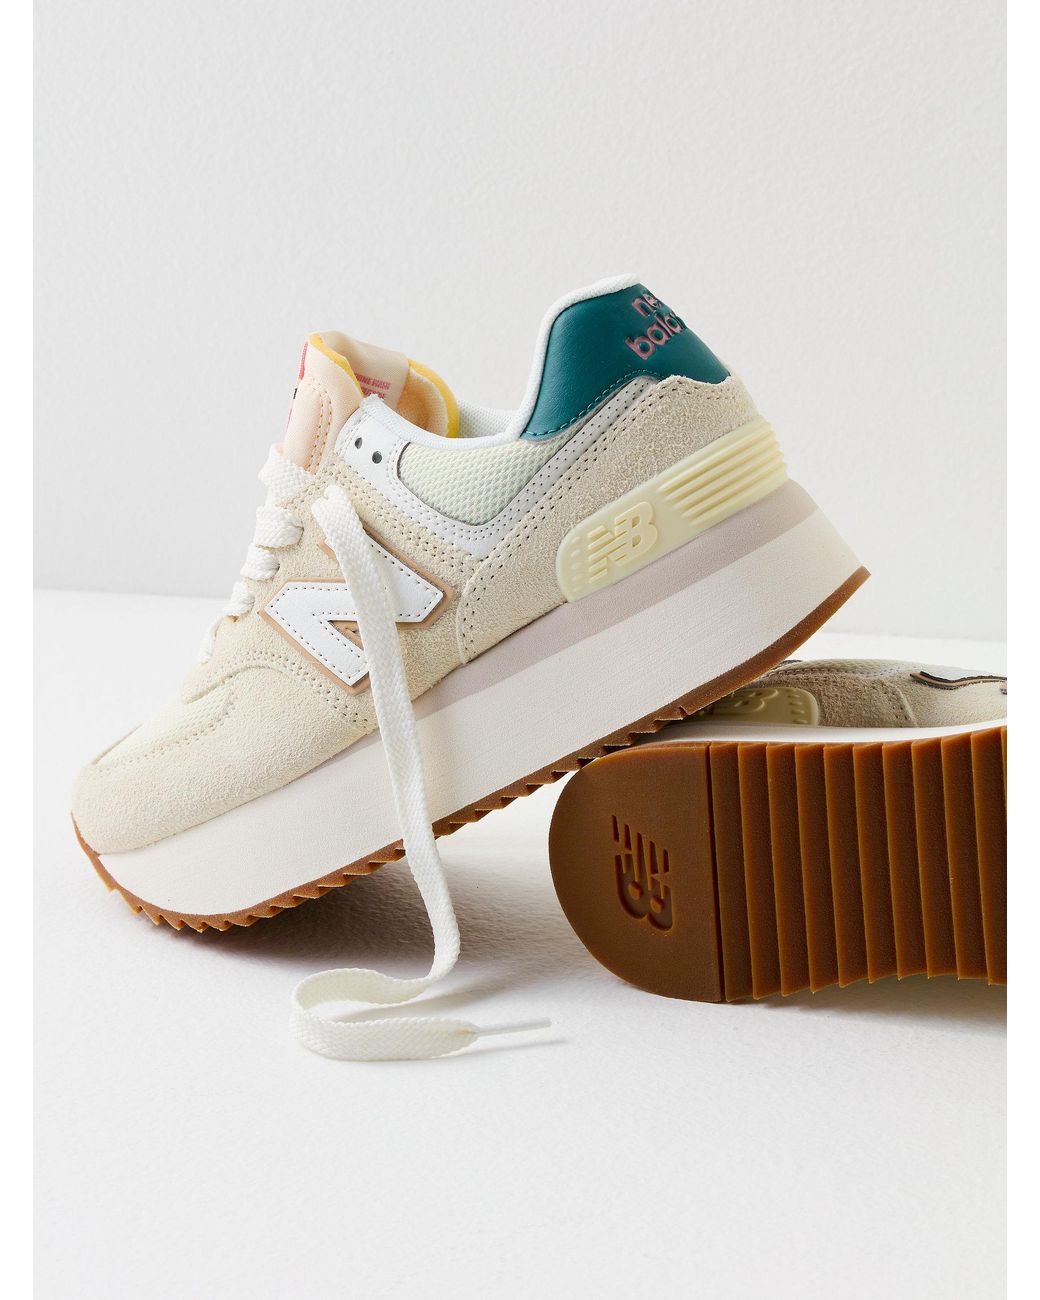 Free People New Balance 574+ Sneakers in Natural | Lyst